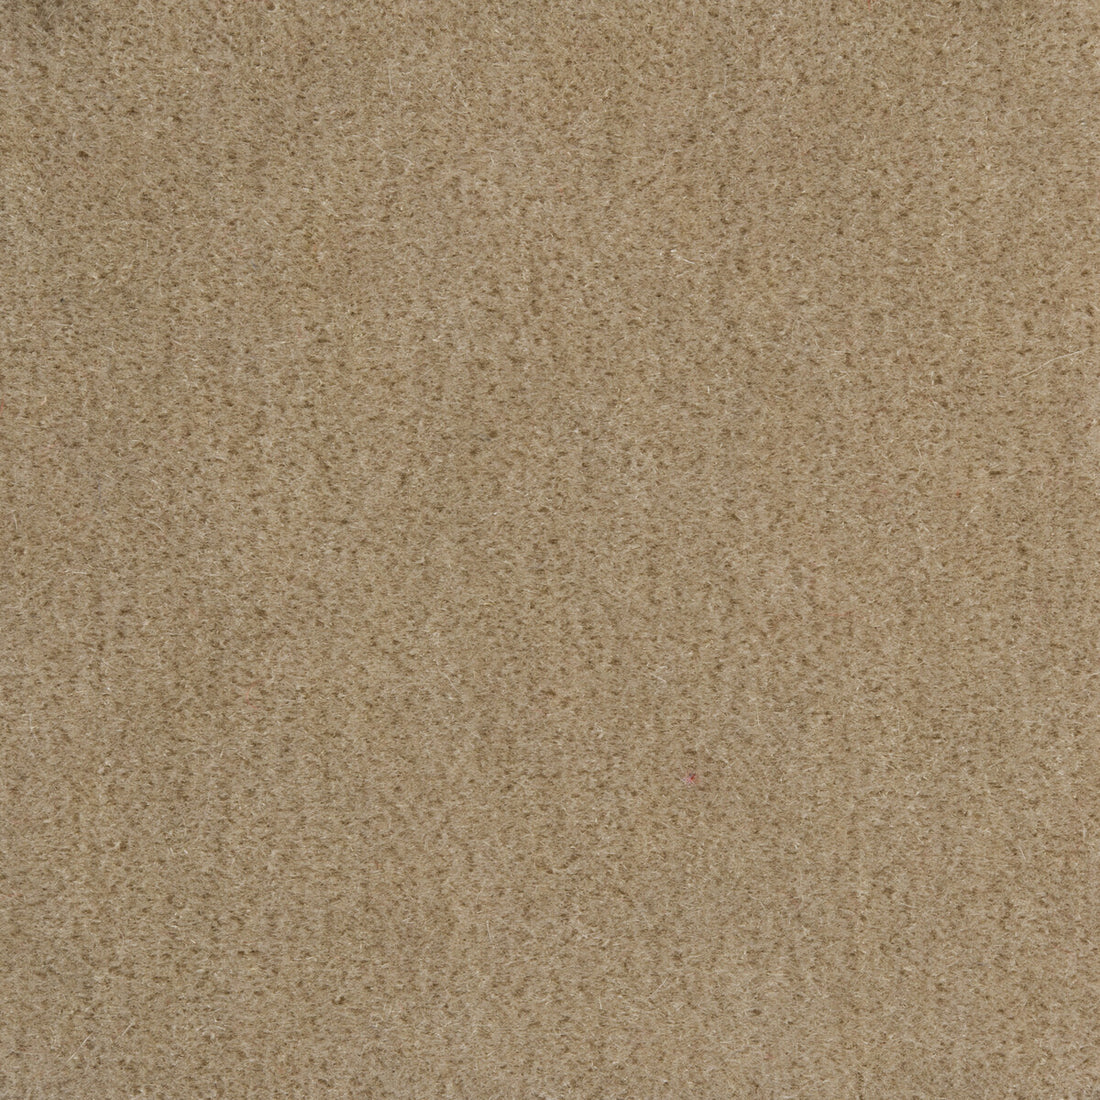 Bachelor Mohair fabric in shale color - pattern 8014101.11.0 - by Brunschwig &amp; Fils